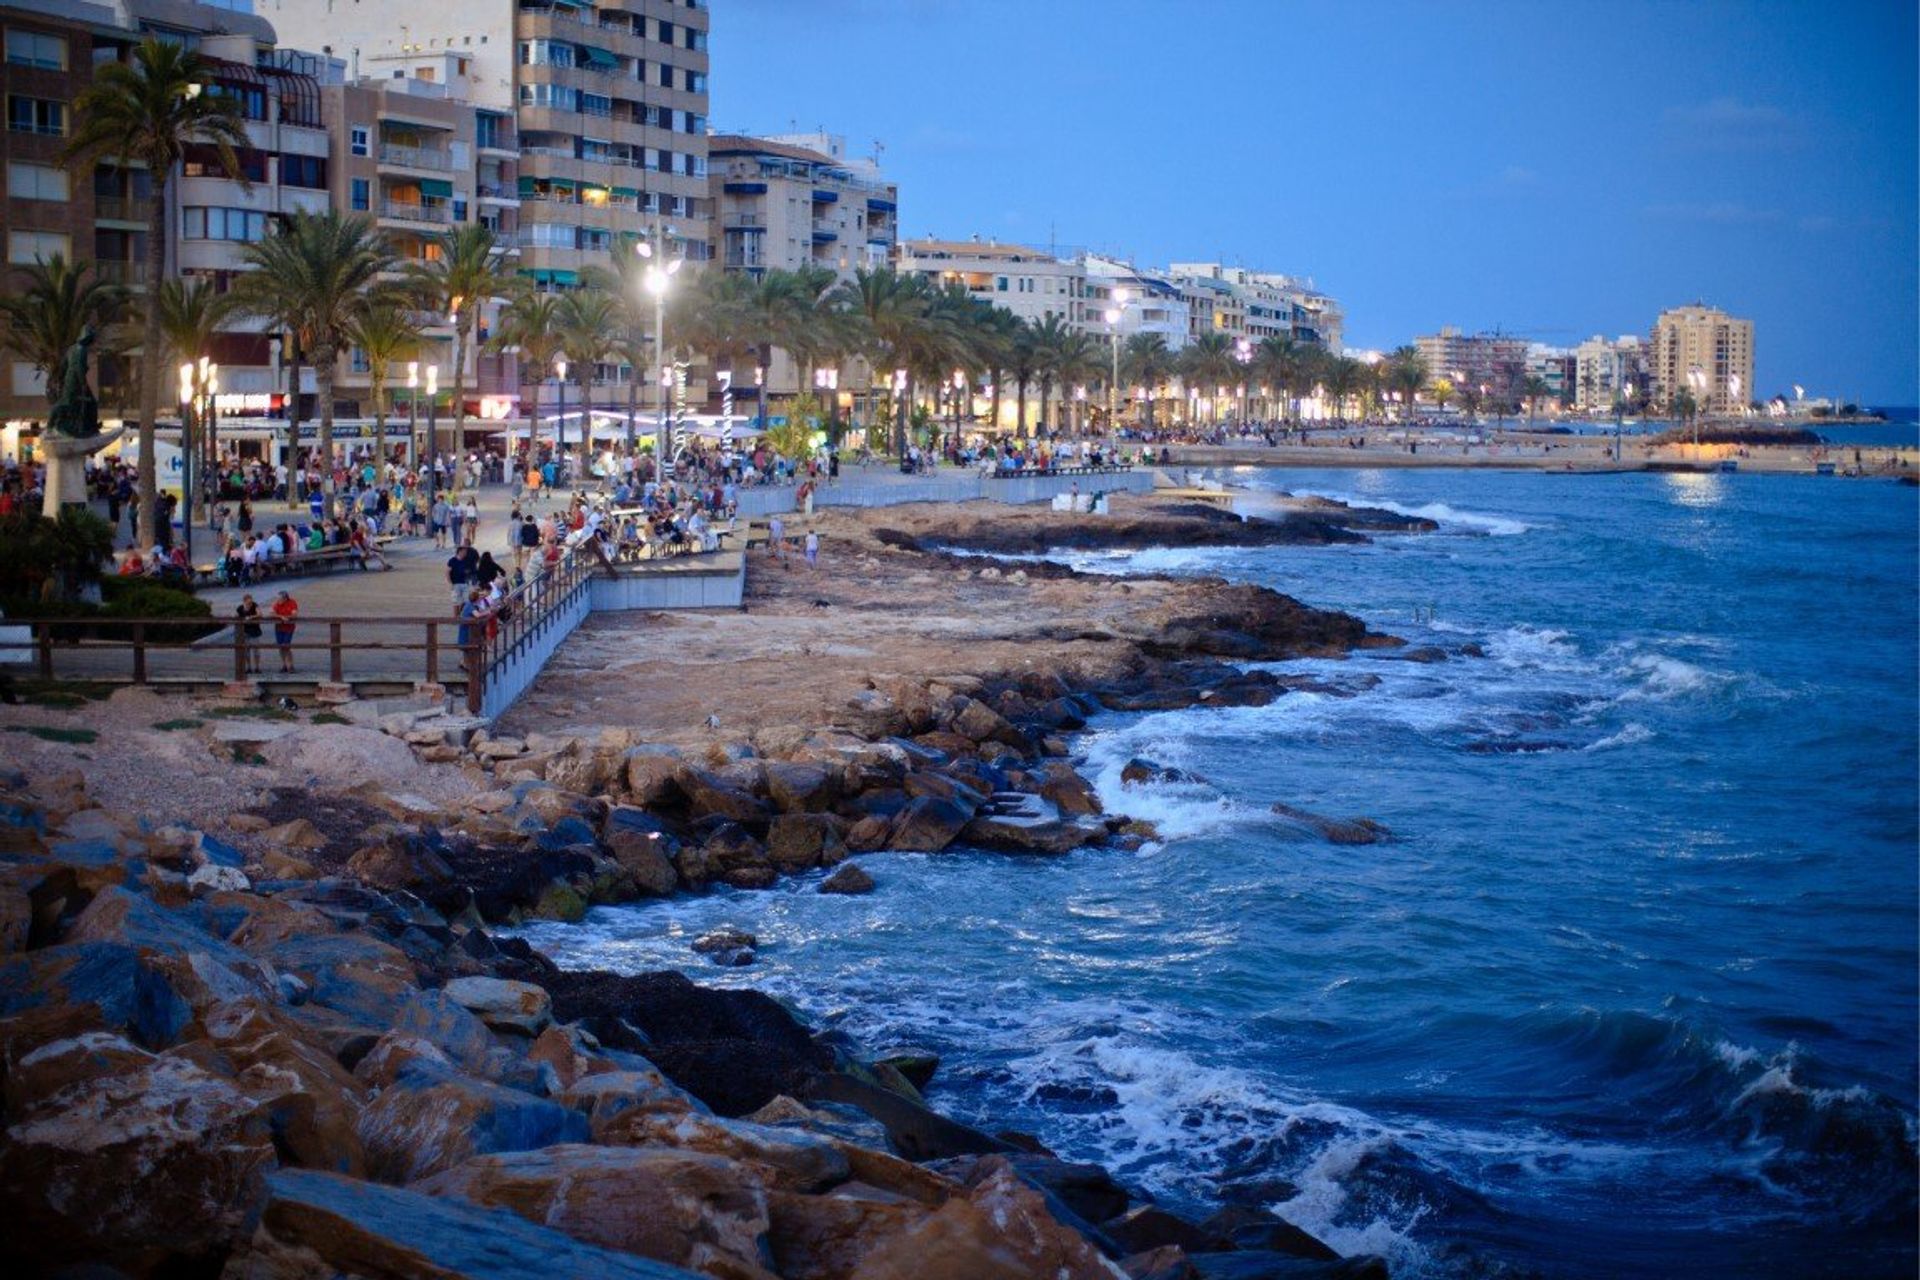 Torrevieja's promenade comes to life after sundown, with a nightly market, over 100 bars and plenty of restaurants